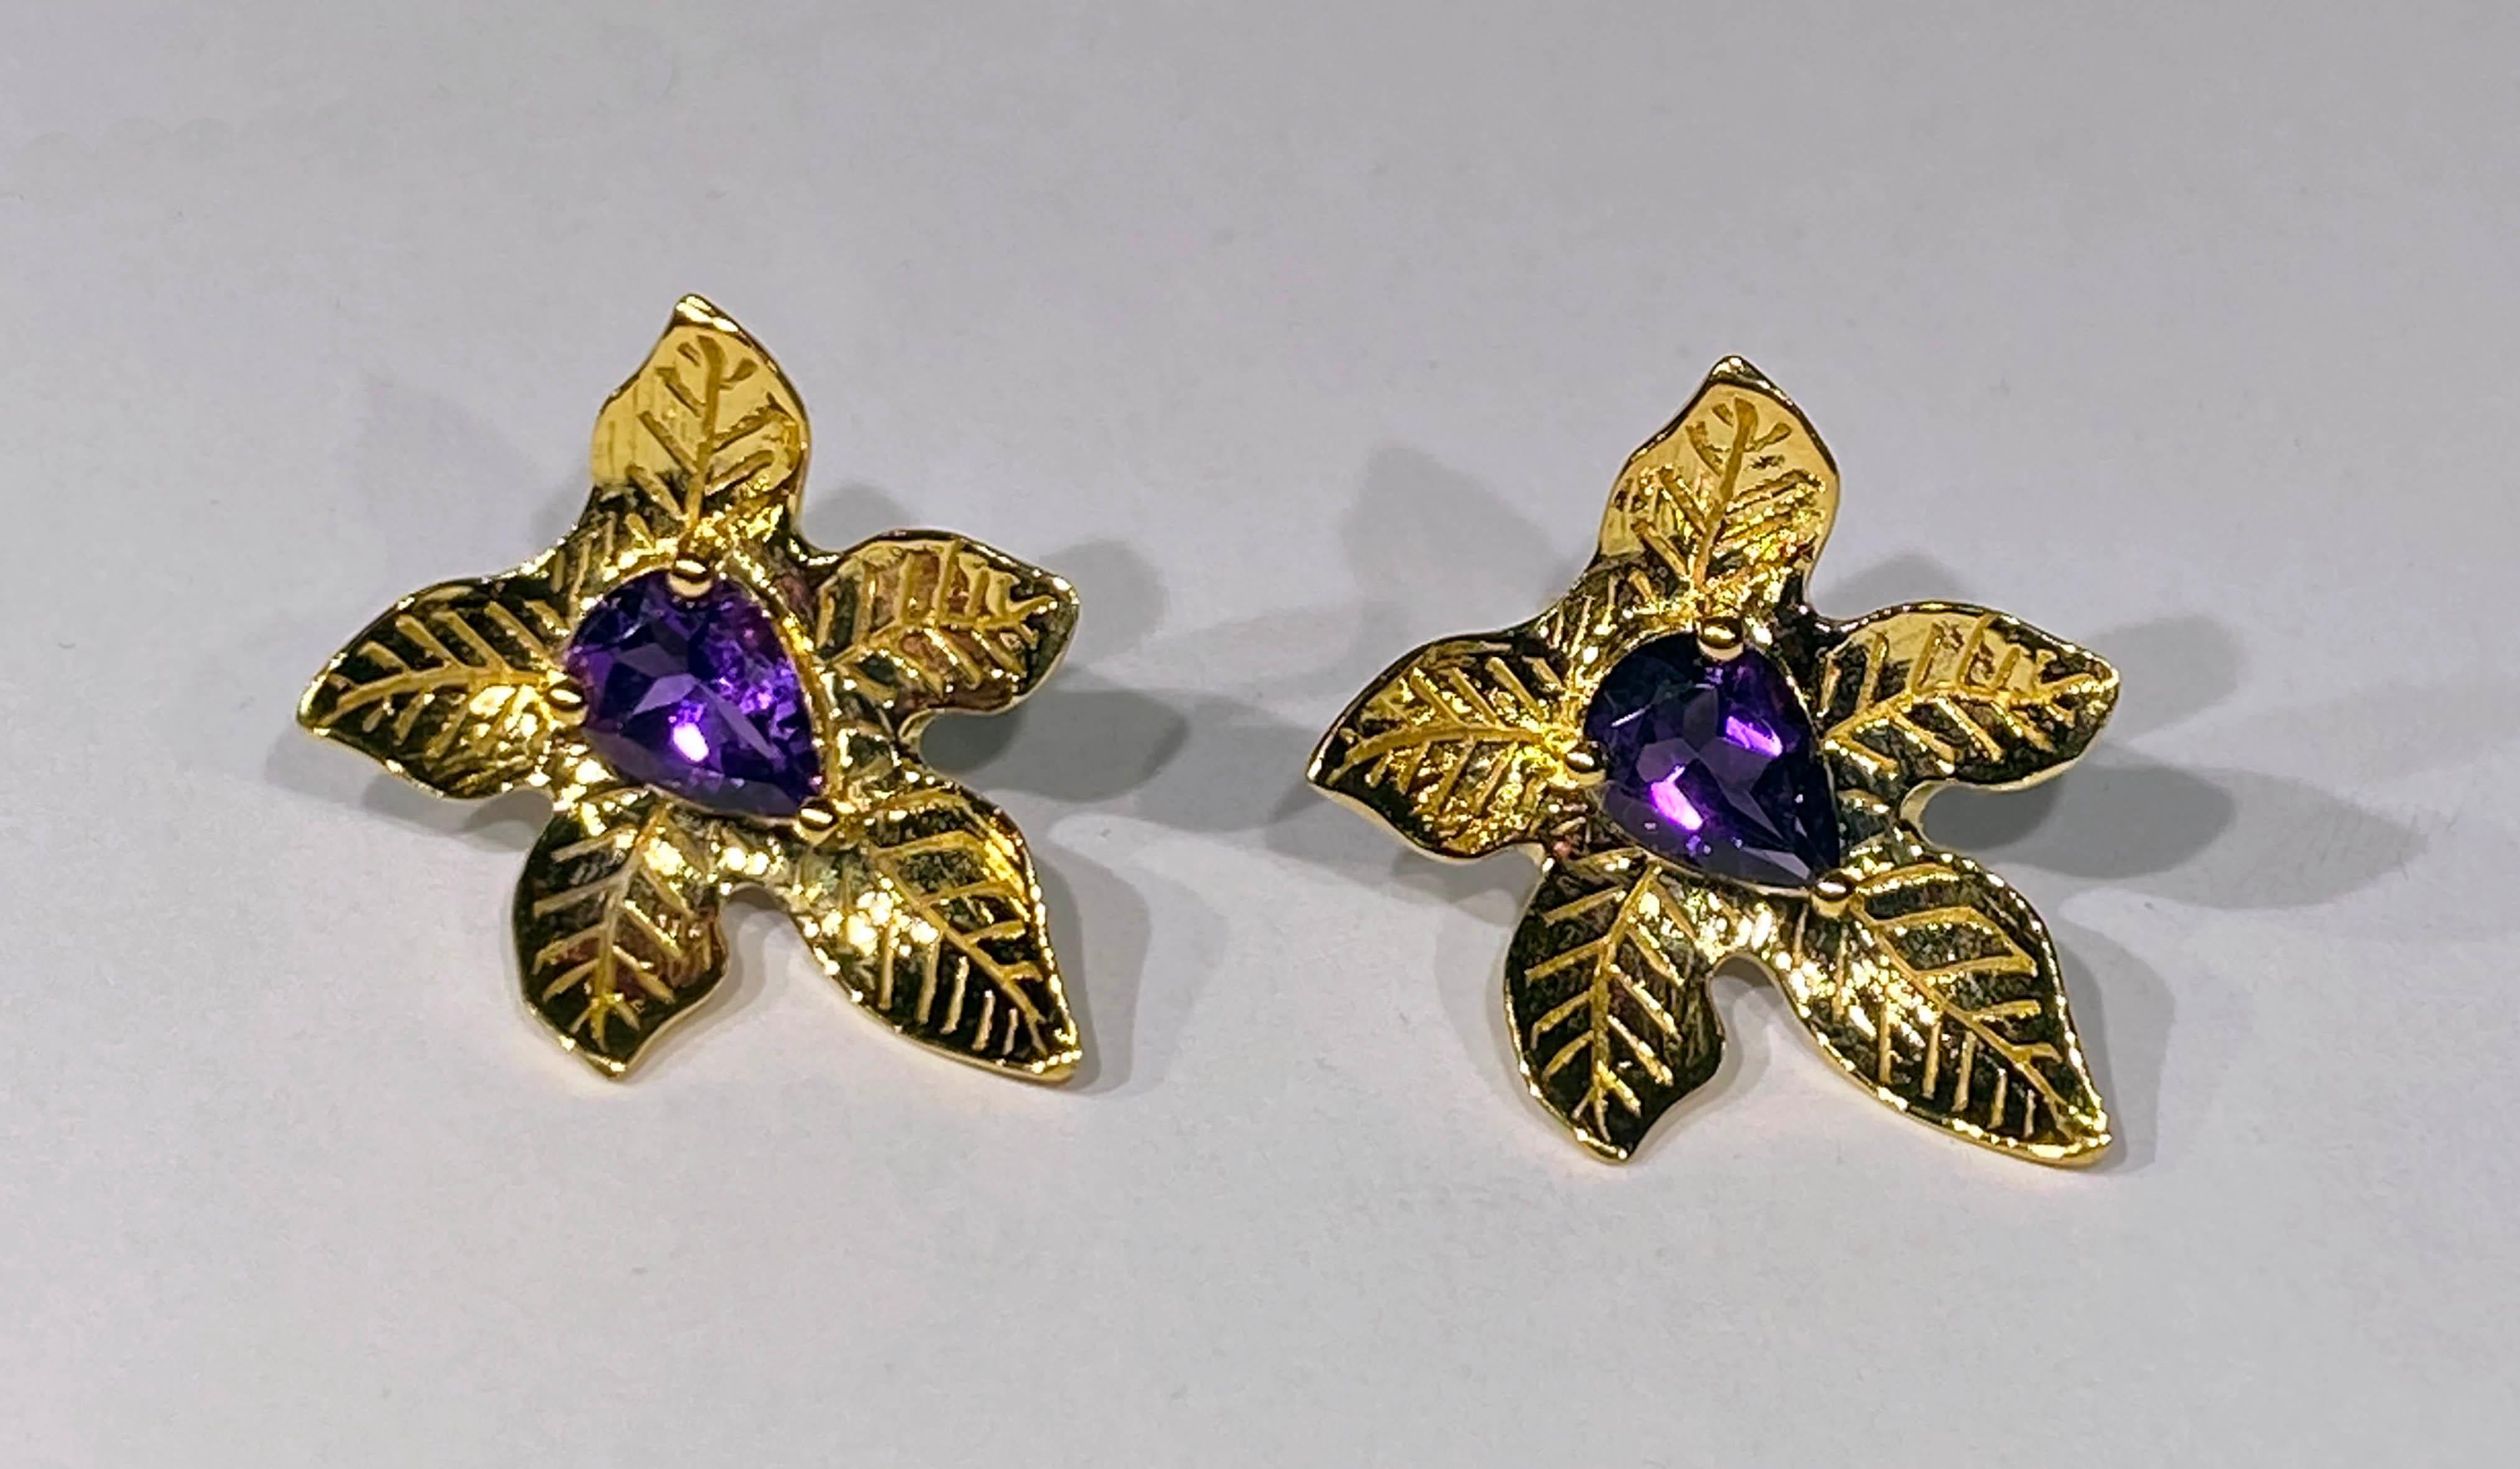 A lovely pair of Gold Plated Silver Leaf Stud Earrings set with Pear Shaped Amethyst TW 1.6 Carats. These Earrings are Gold Plated.

Originally from San Diego, California, Kary Adam lived in the “Gem Capital of the World” - Bangkok, Thailand,